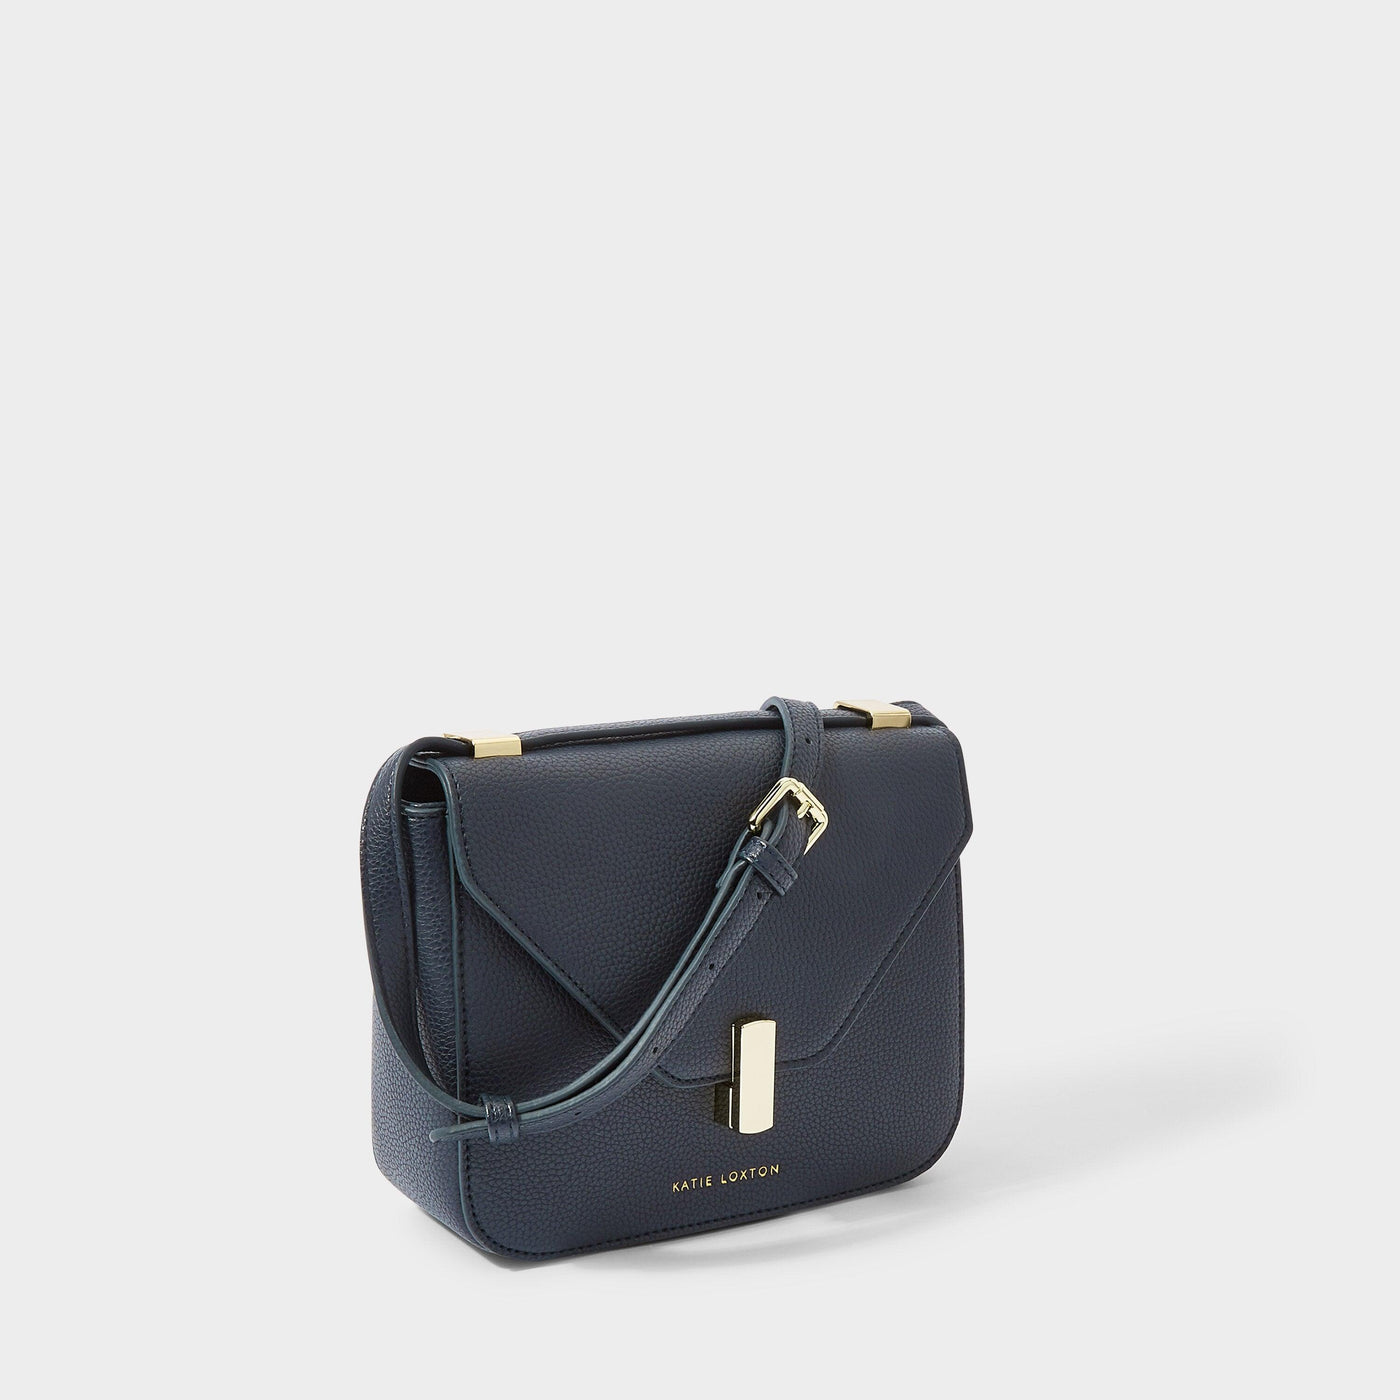 Navy flap closure crossbody purse with the strap draped over the front